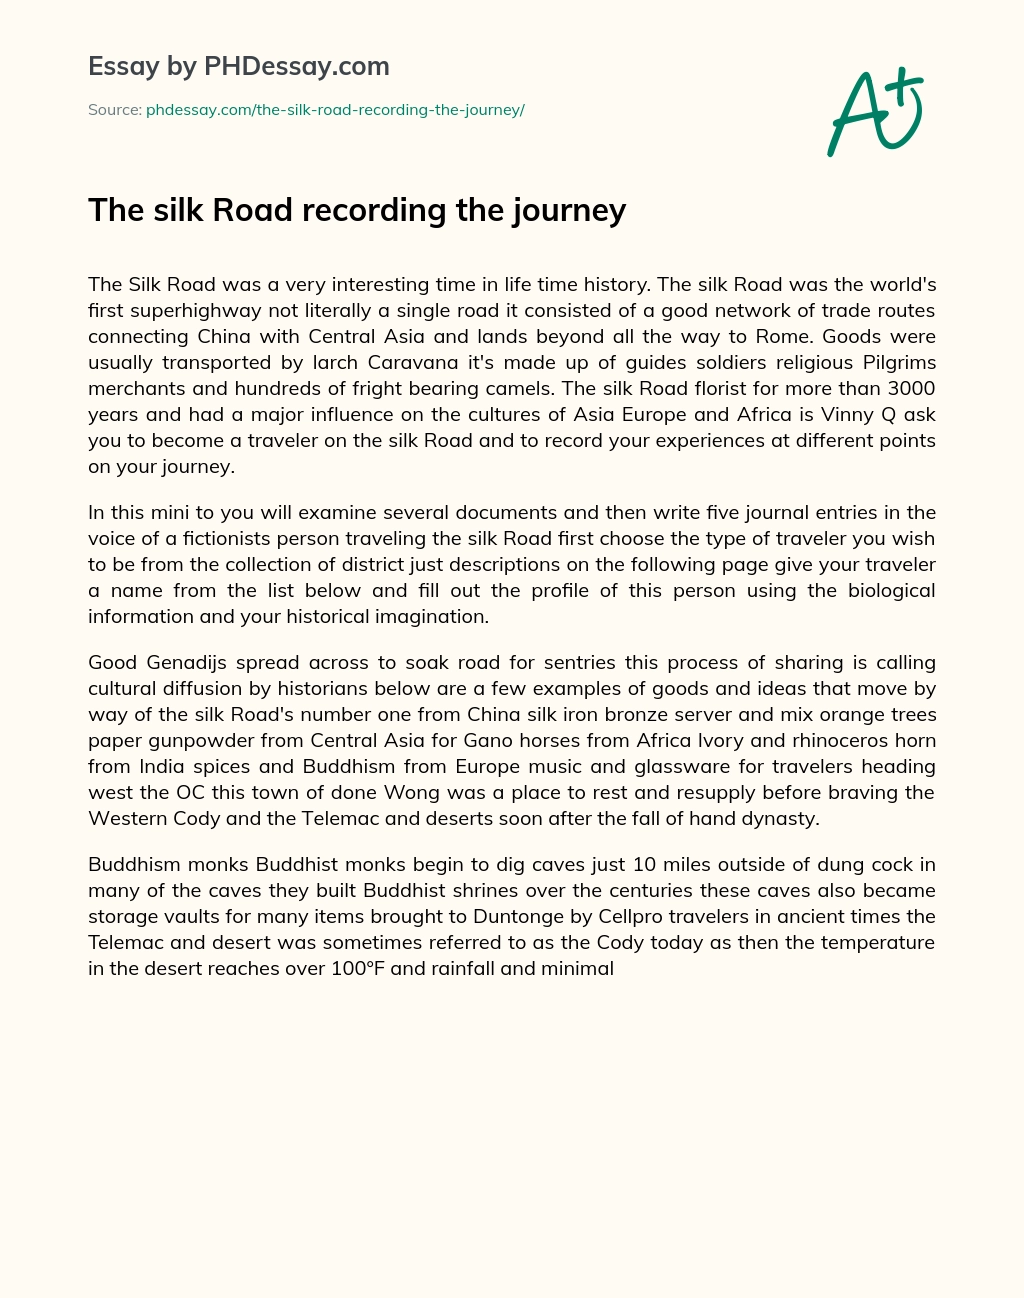 The silk Road recording the journey essay